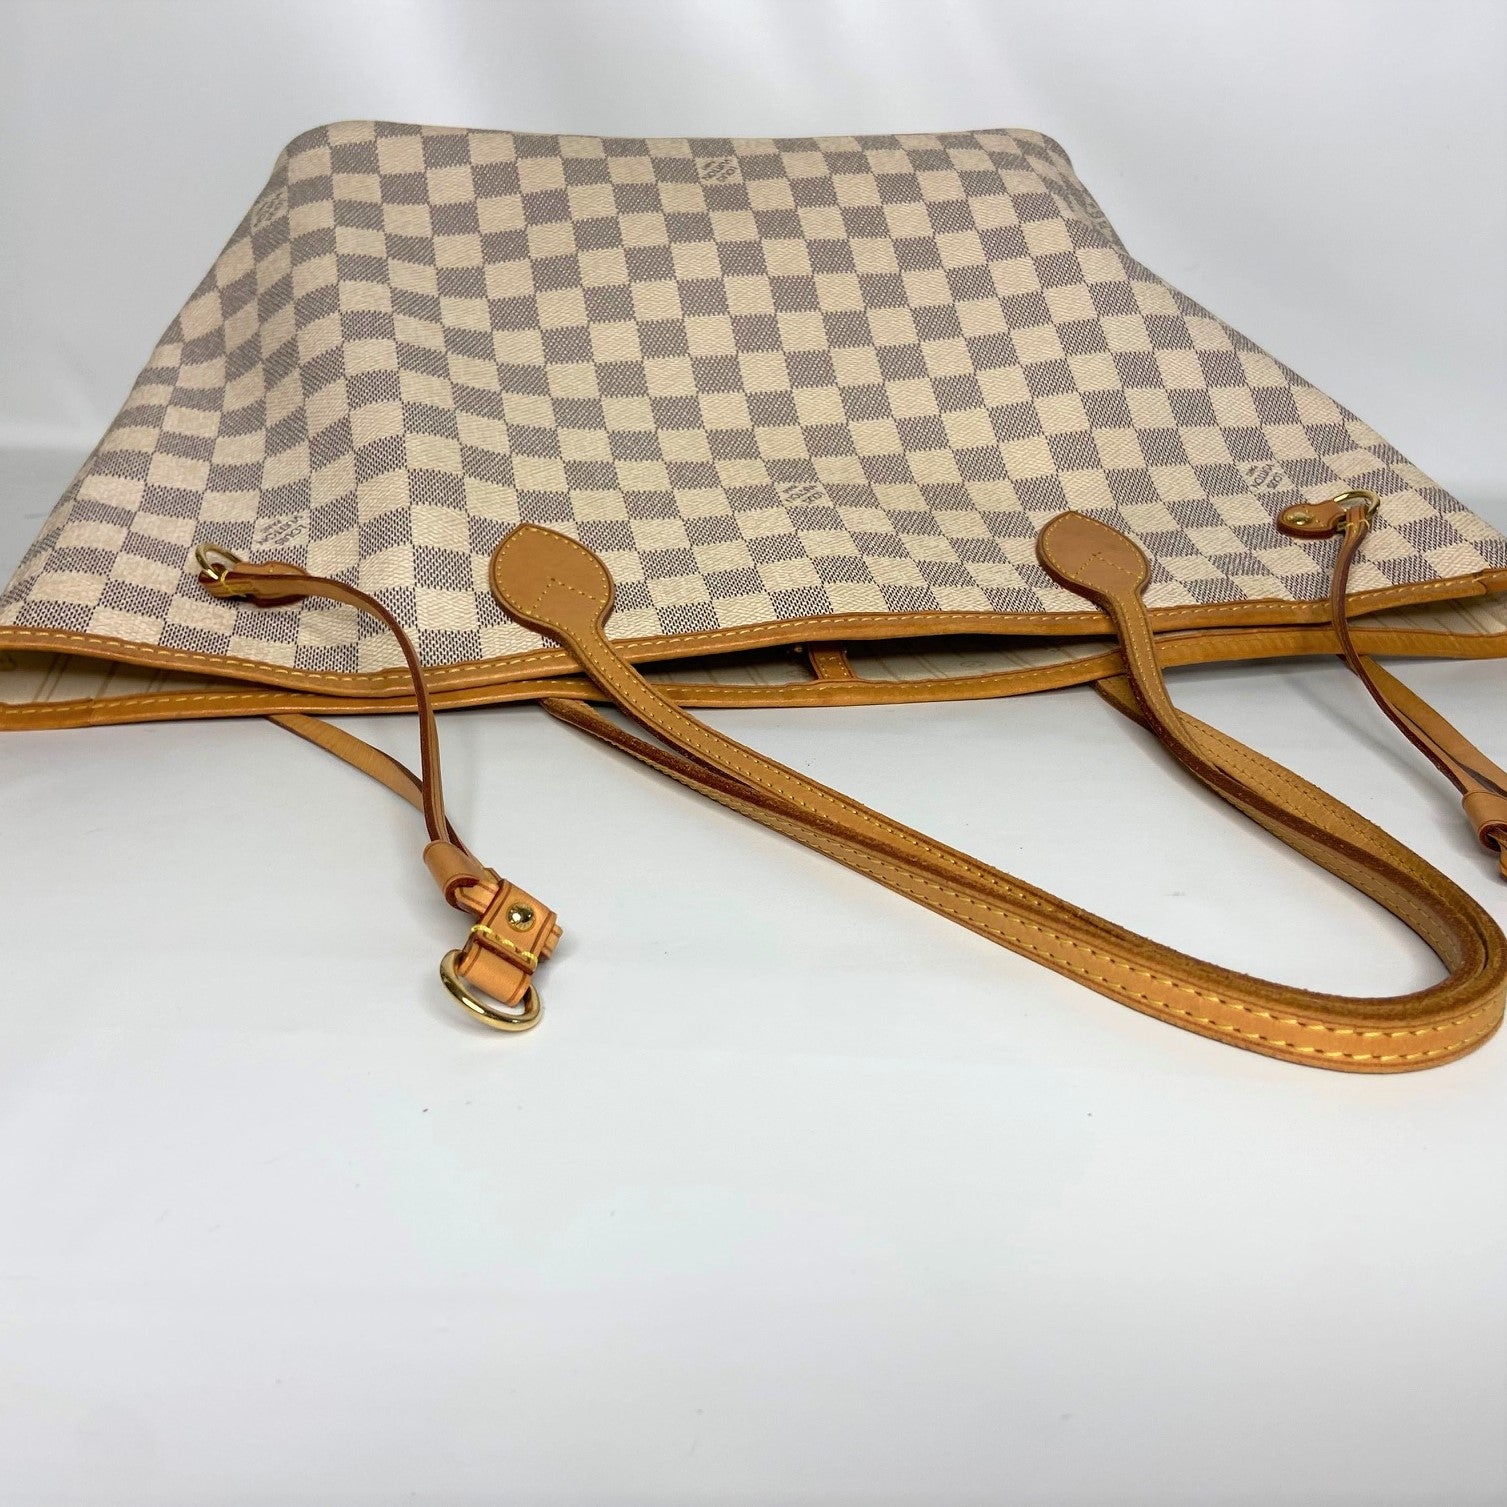 ✨ℕ𝕖𝕨 𝔸𝕣𝕣𝕚𝕧𝕒𝕝𝕤✨ 💝Discontinued - Neverfull Luxury